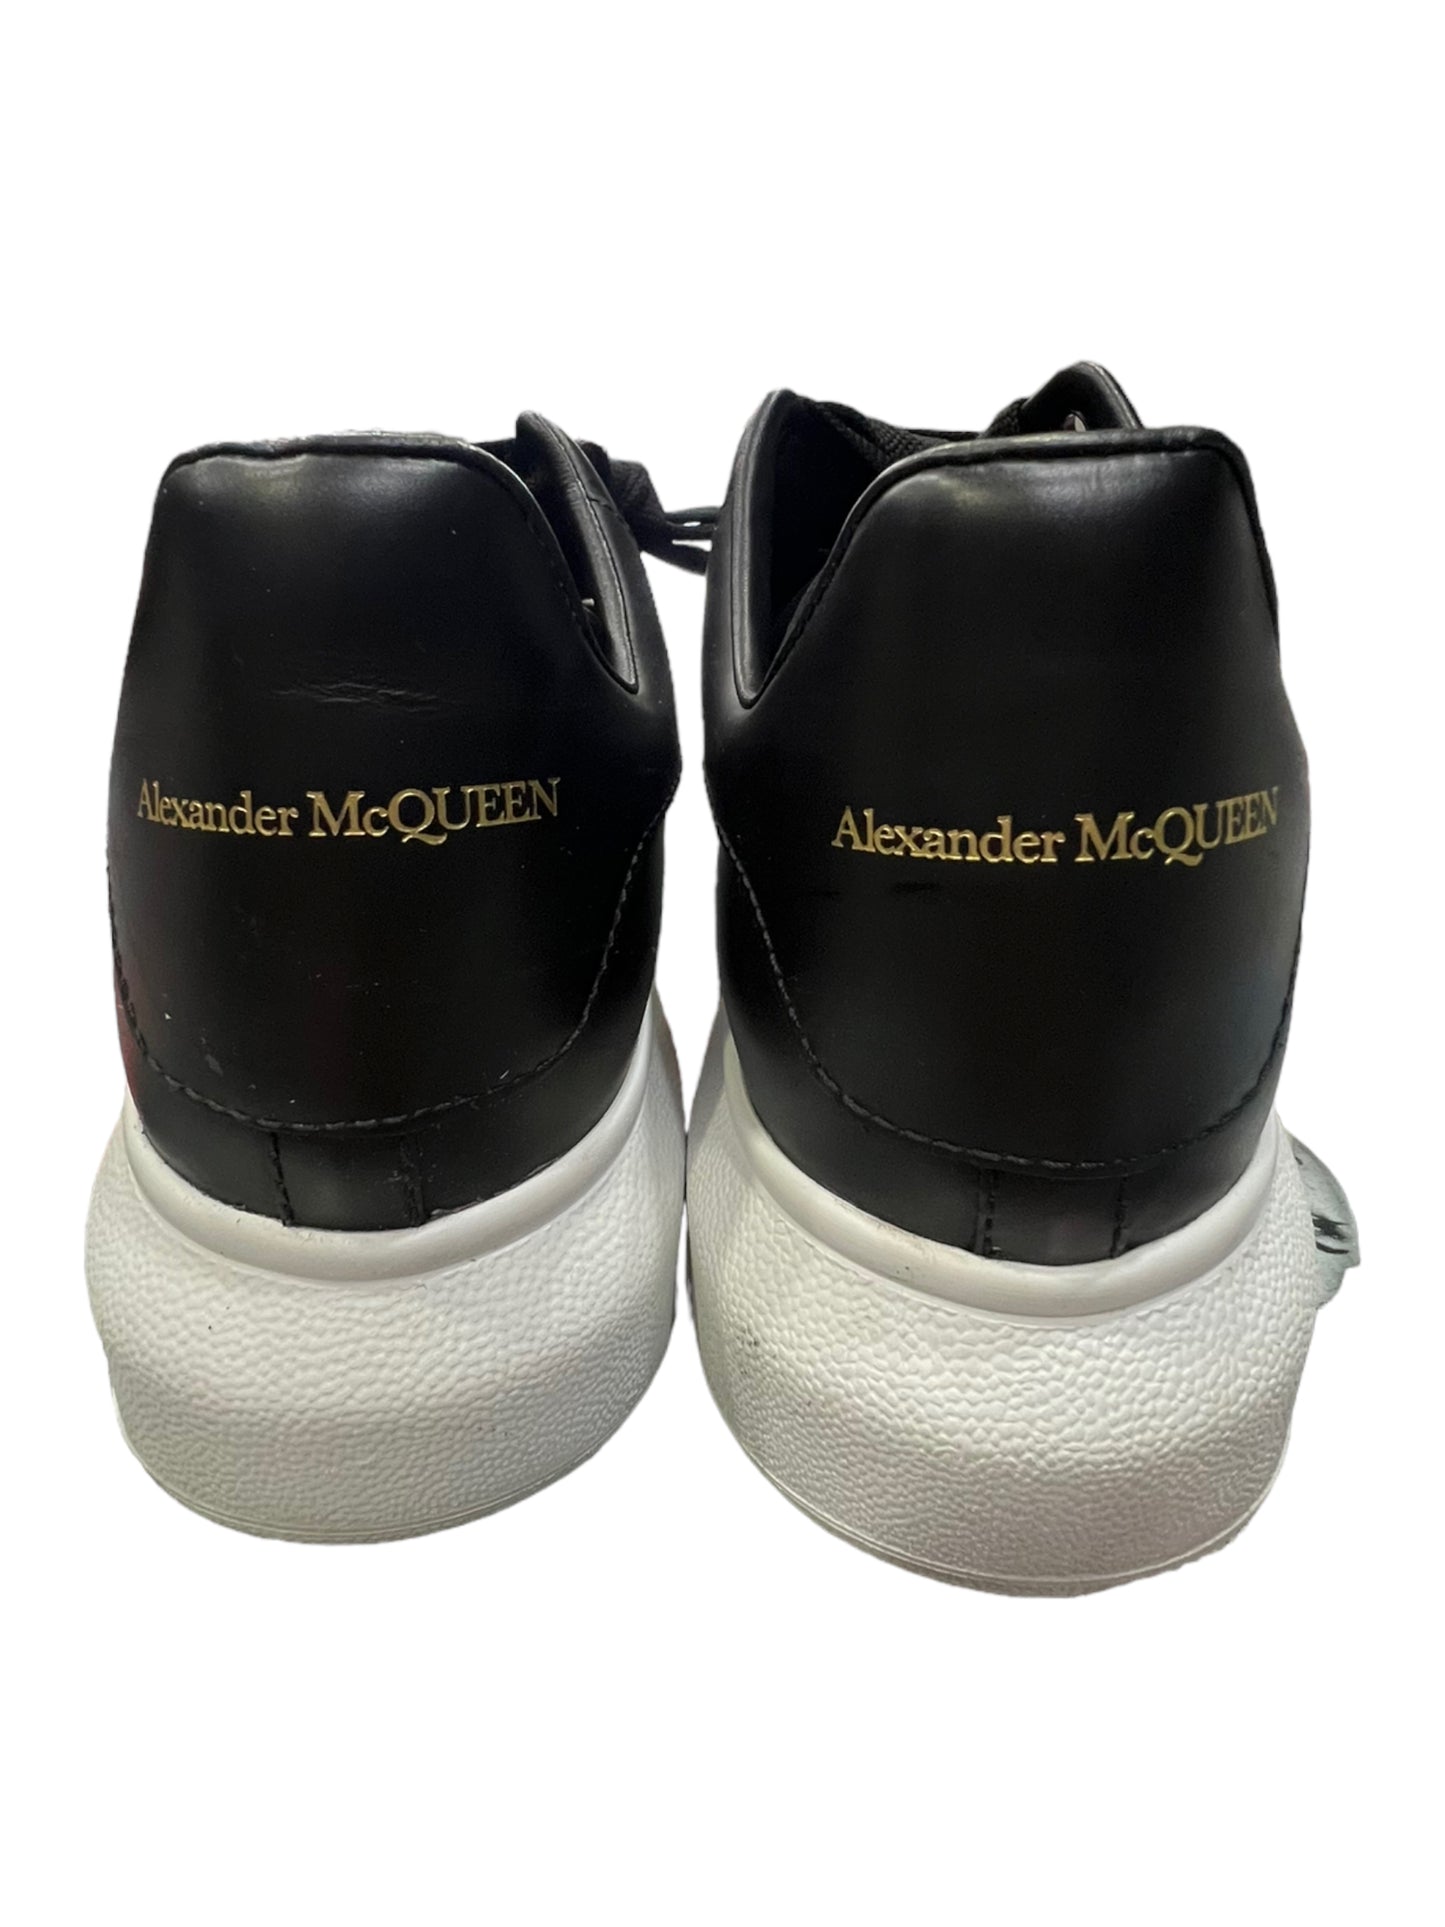 Alexand McQueen Black/White pre owned size 37.5